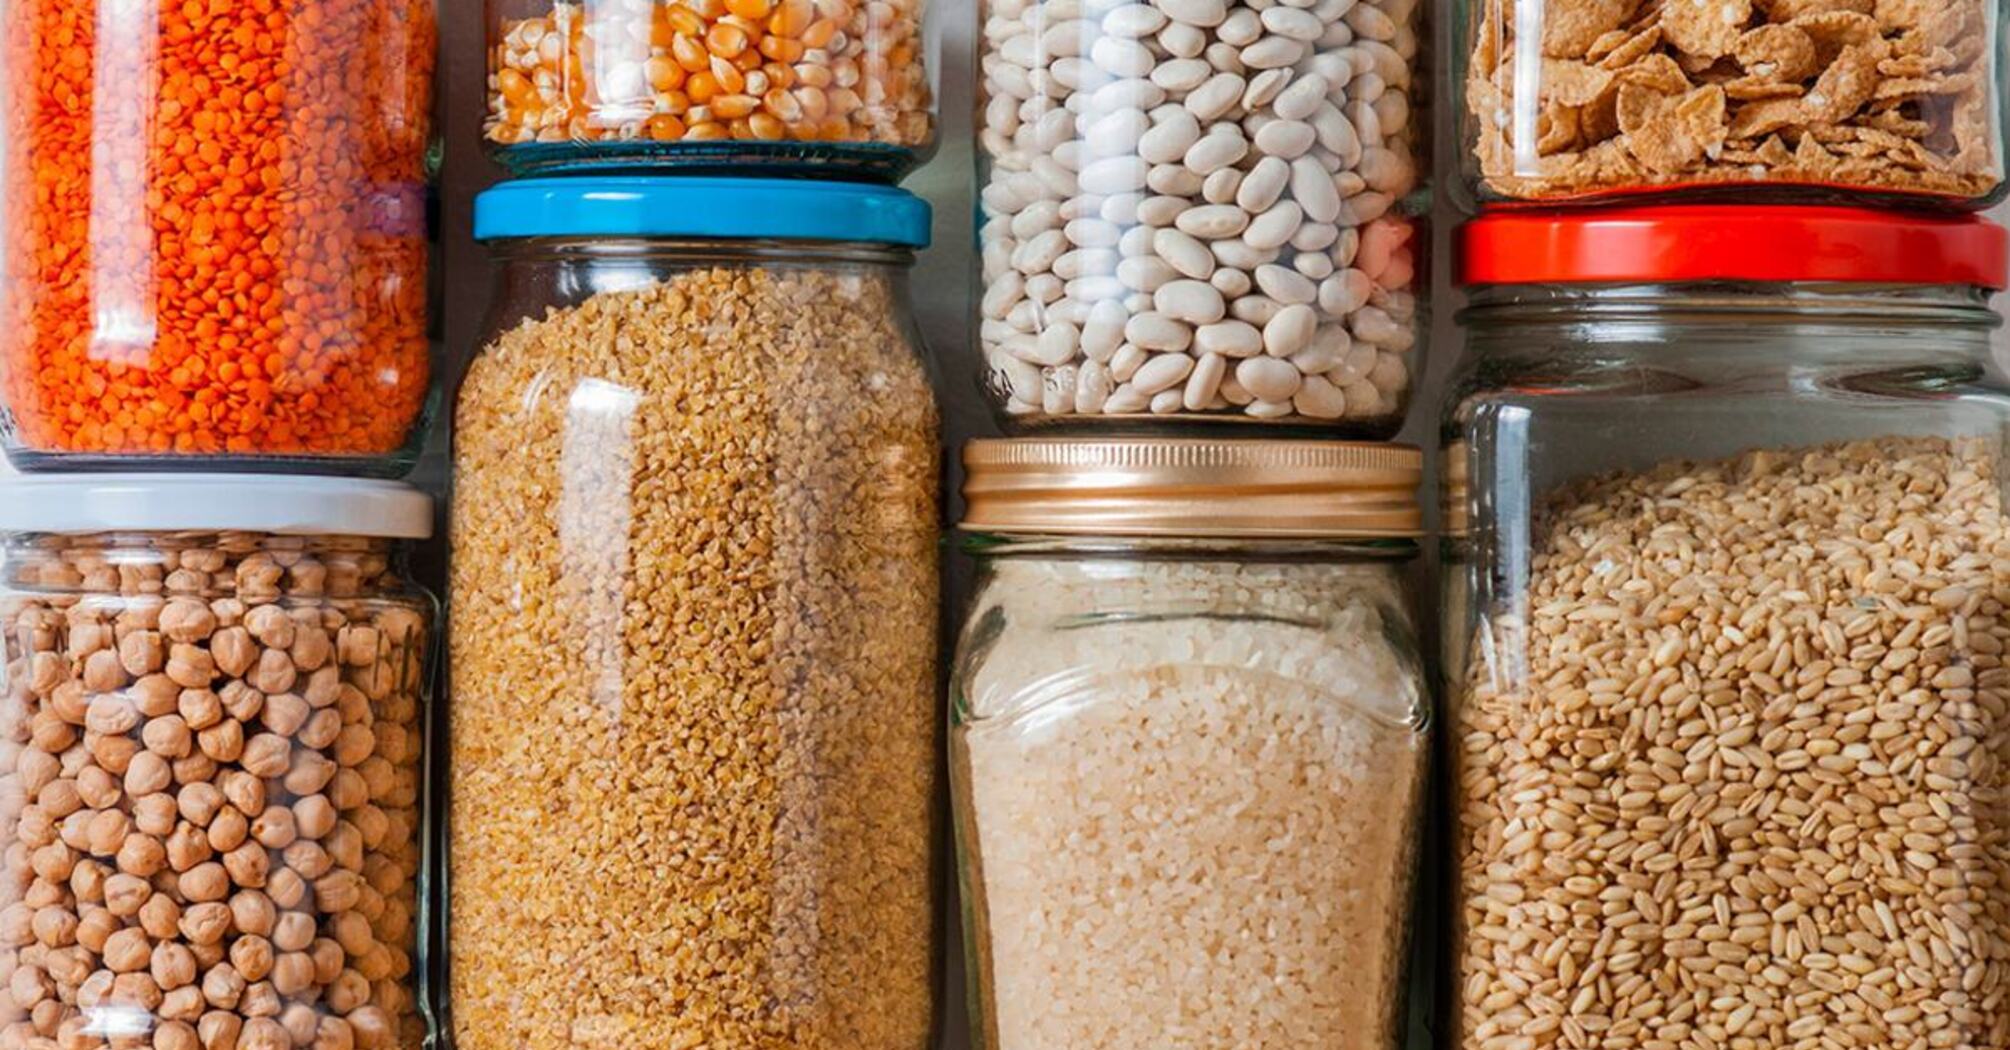 How to store cereals at home - tips for storing cereals